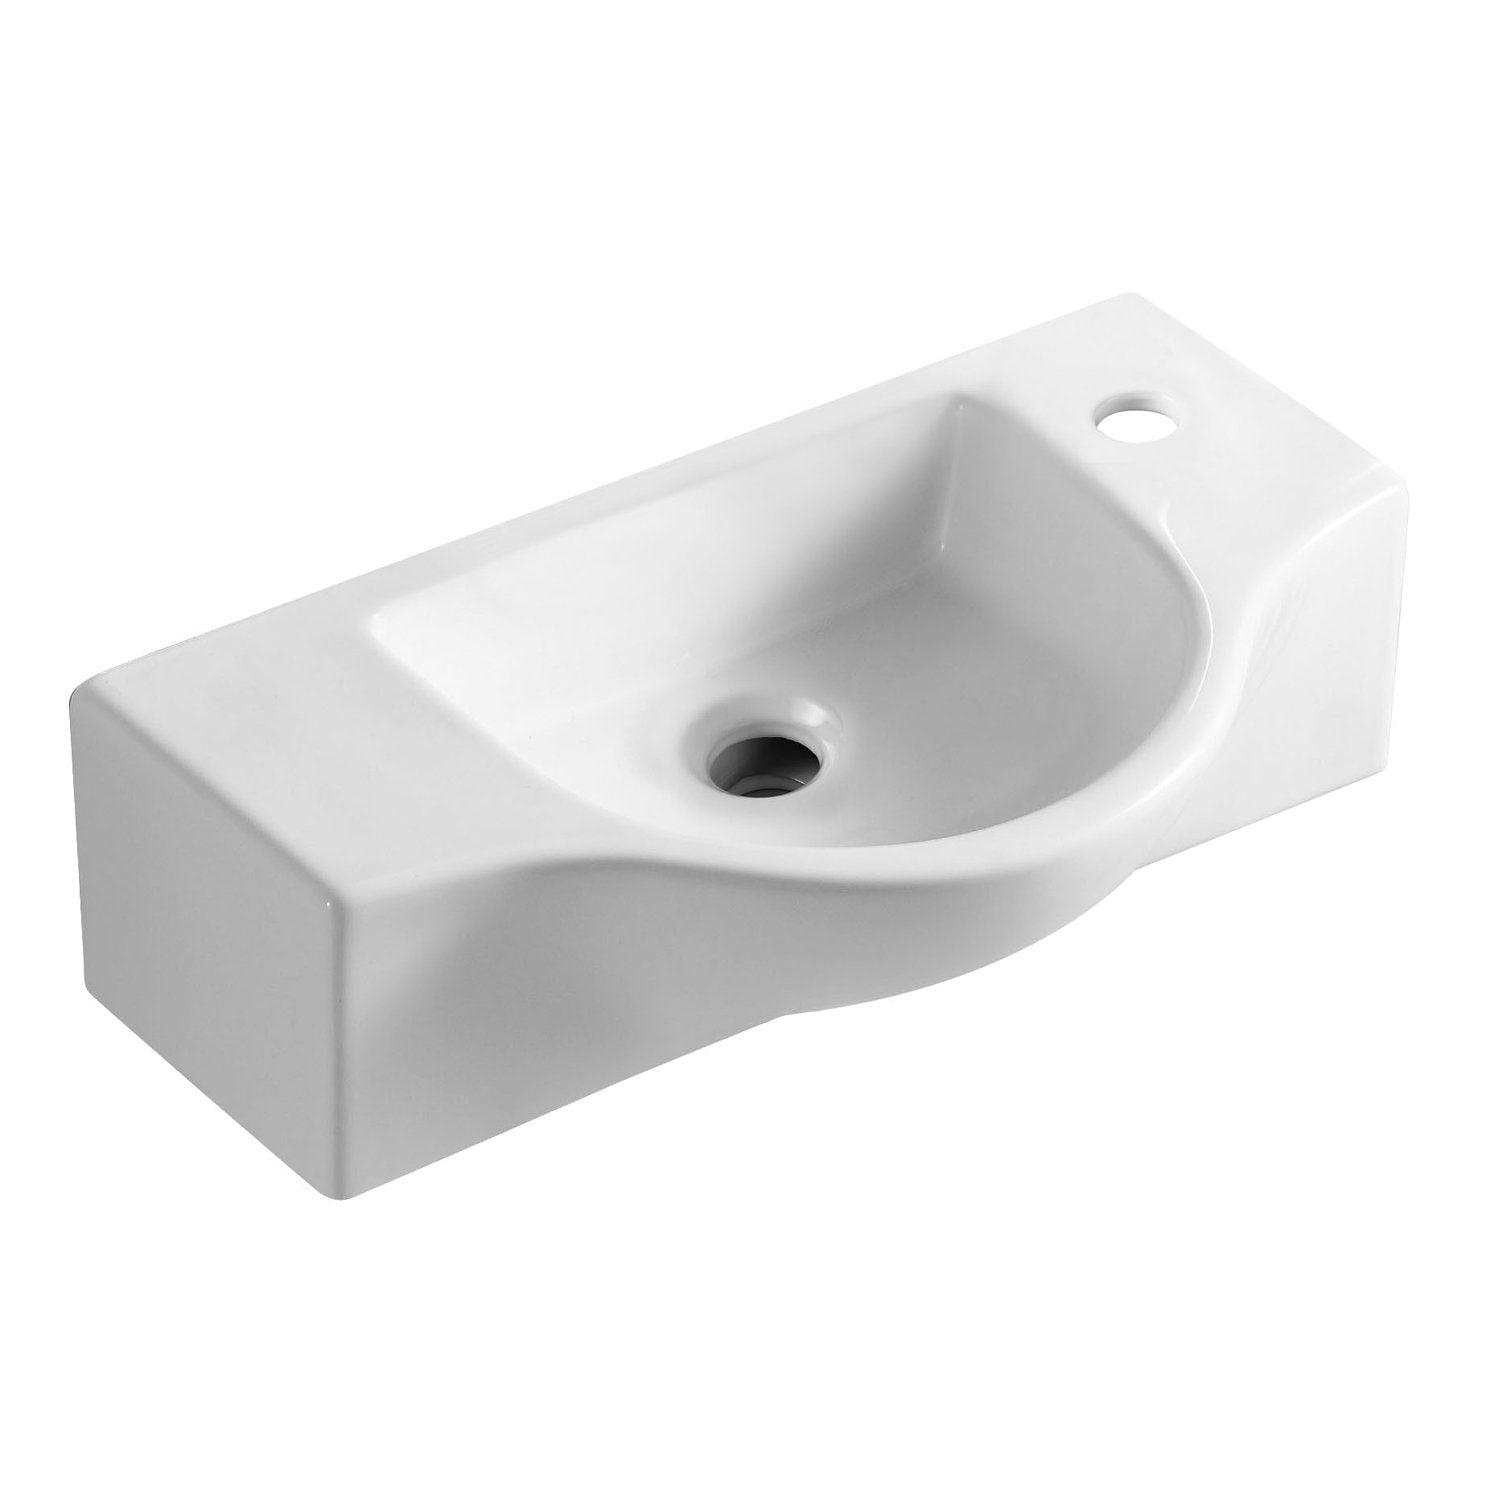 ALFI ABC114 White 18" Small Wall Mounted Ceramic Sink with Faucet Hole